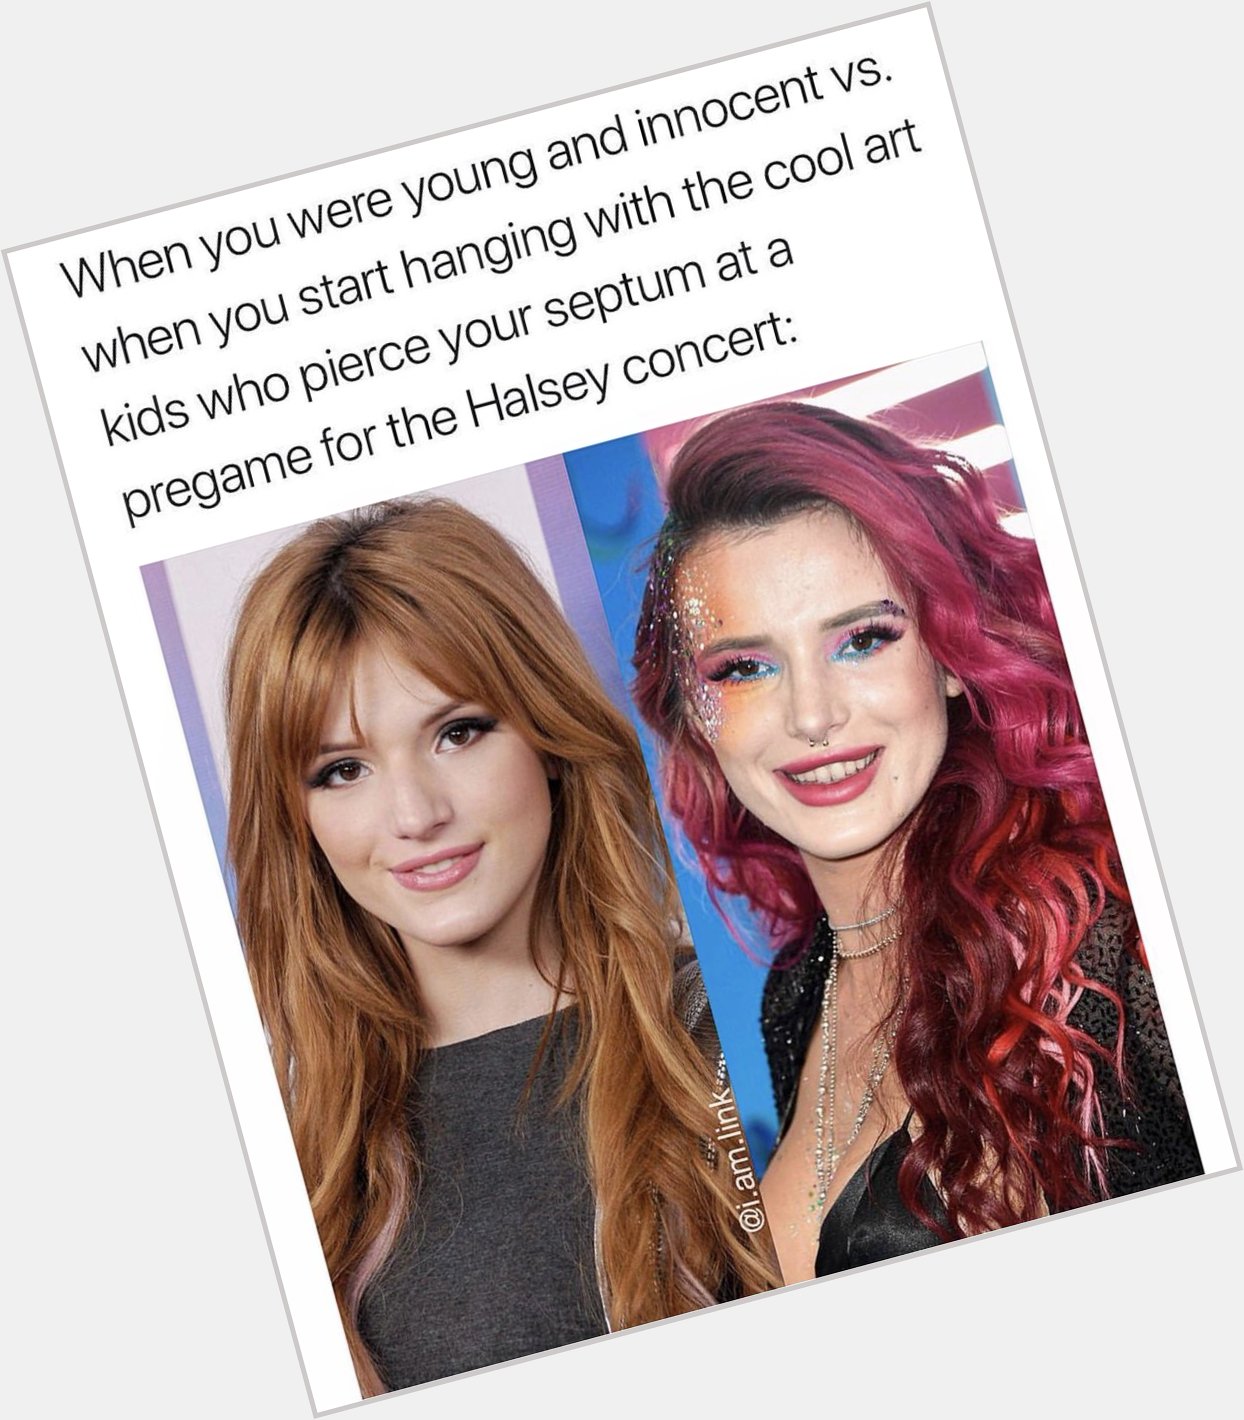 Happy birthday Bella Thorne!! Here are some of the reasons we love her so much:  